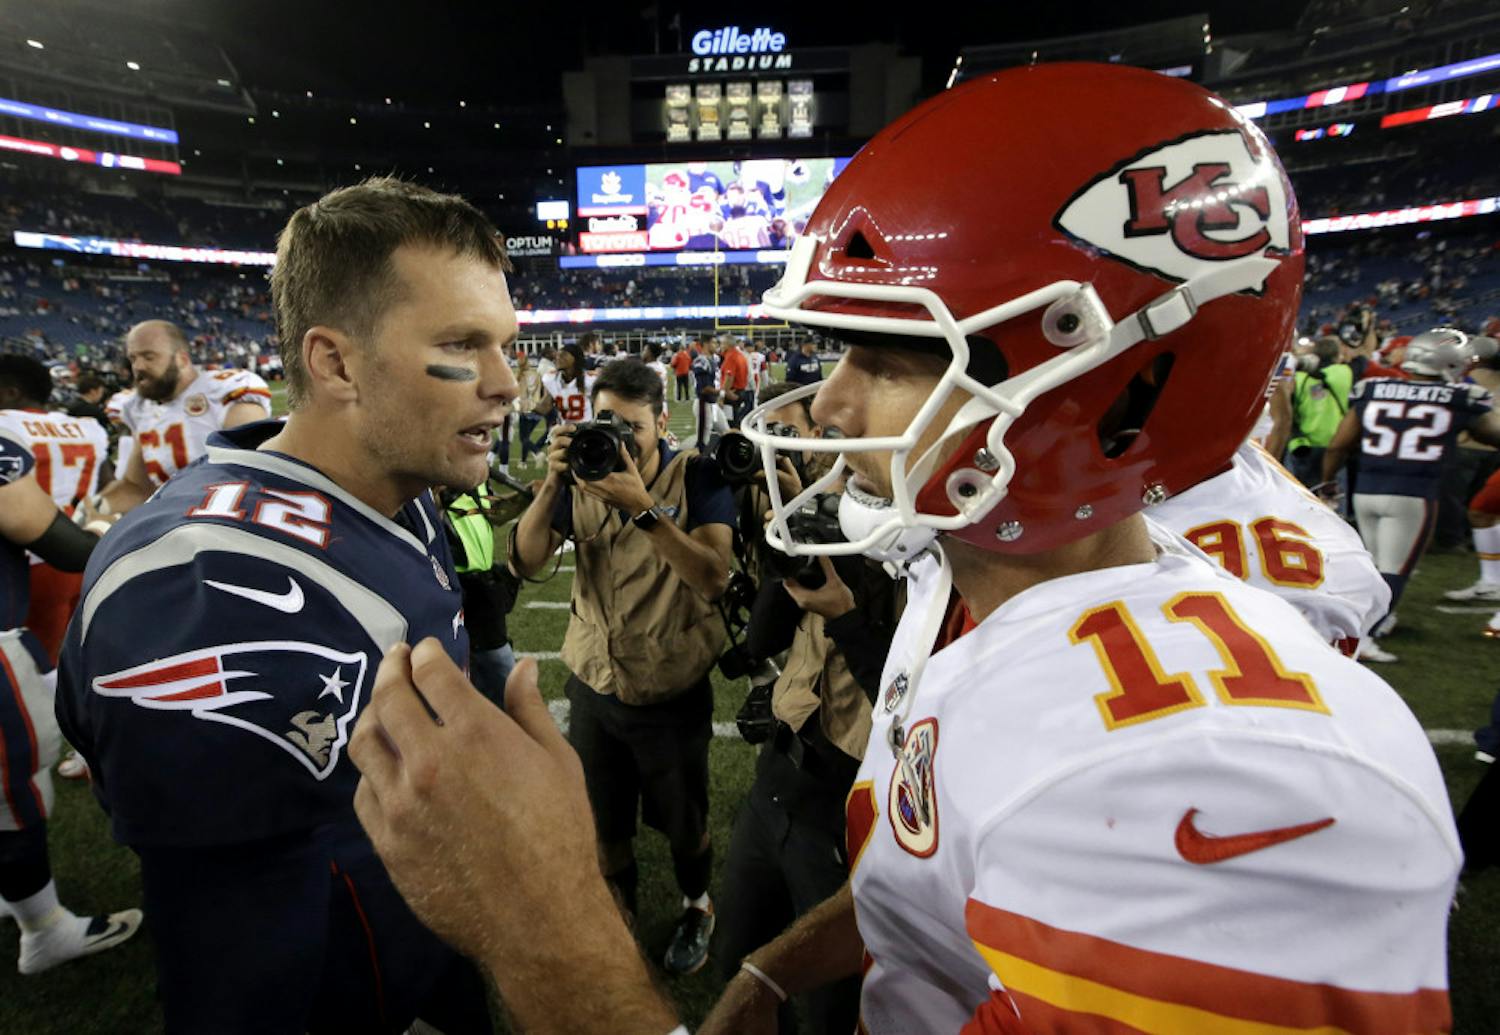 New England Patriots quarterback Tom Brady, left, and Kansas City Chiefs quarterback Alex Smith, right, speak at midfield after an NFL football game, early Friday, Sept. 8, 2017, in Foxborough, Mass. (AP Photo/Steven Senne)